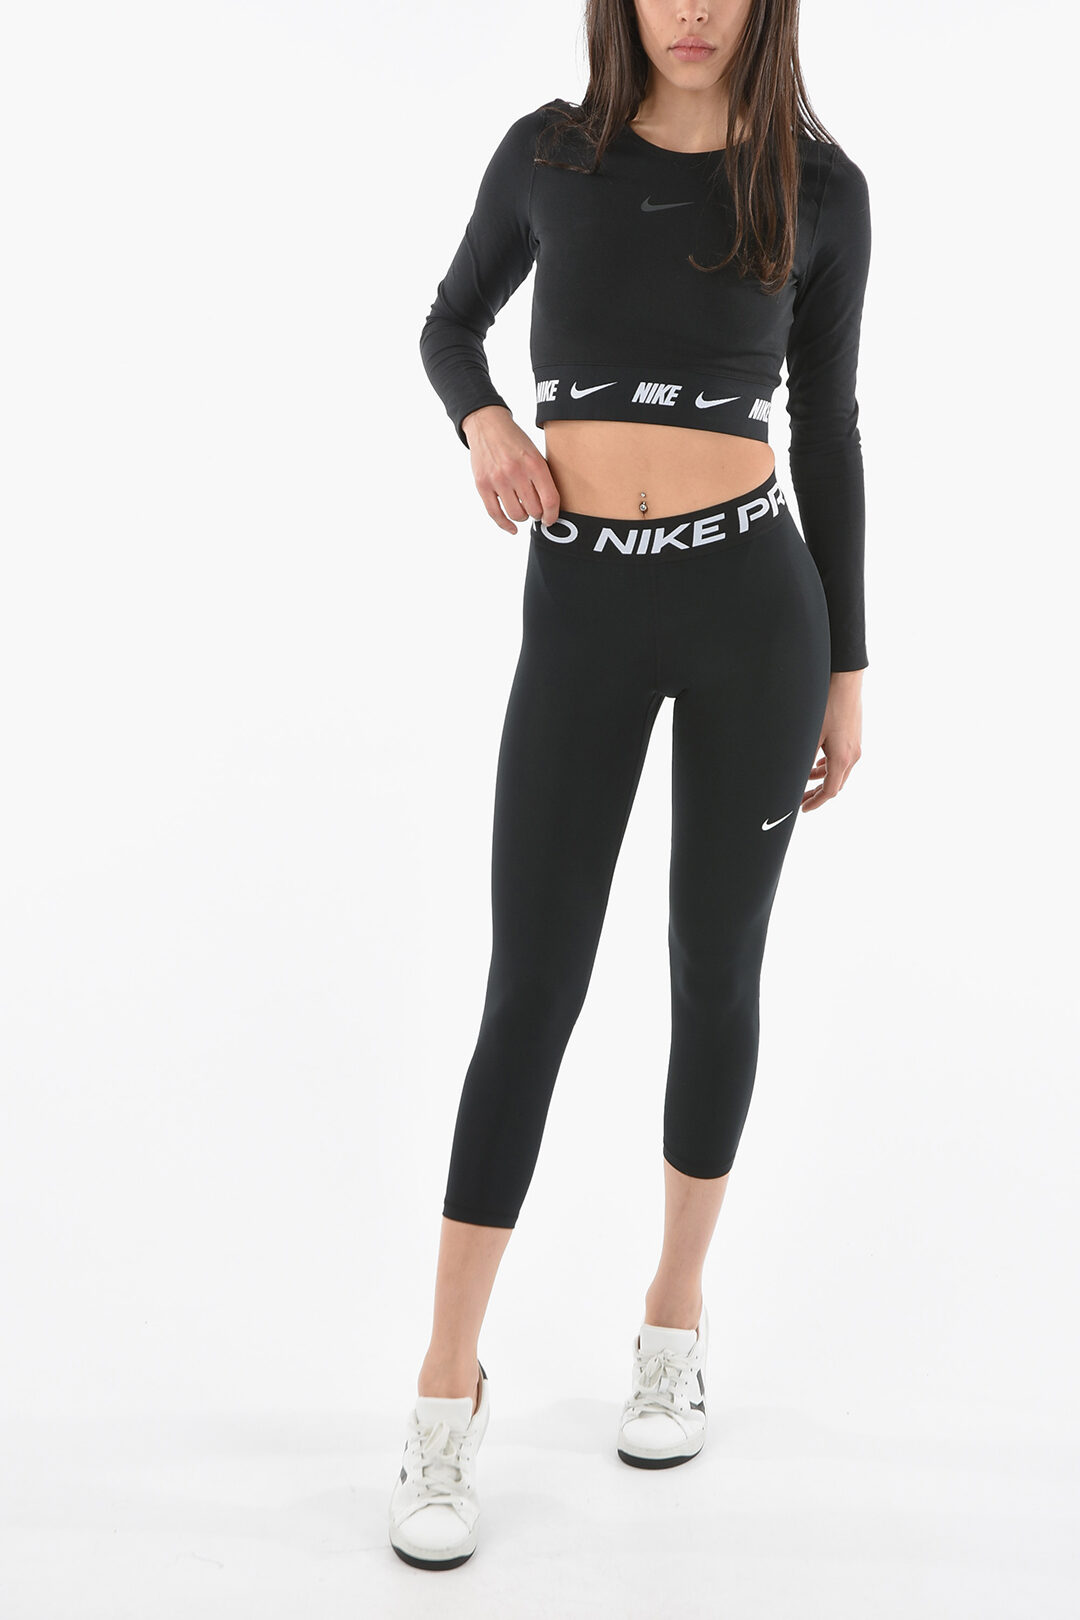 PRO Logoed At the Waist DR-FIT Leggings women - Glamood Outlet